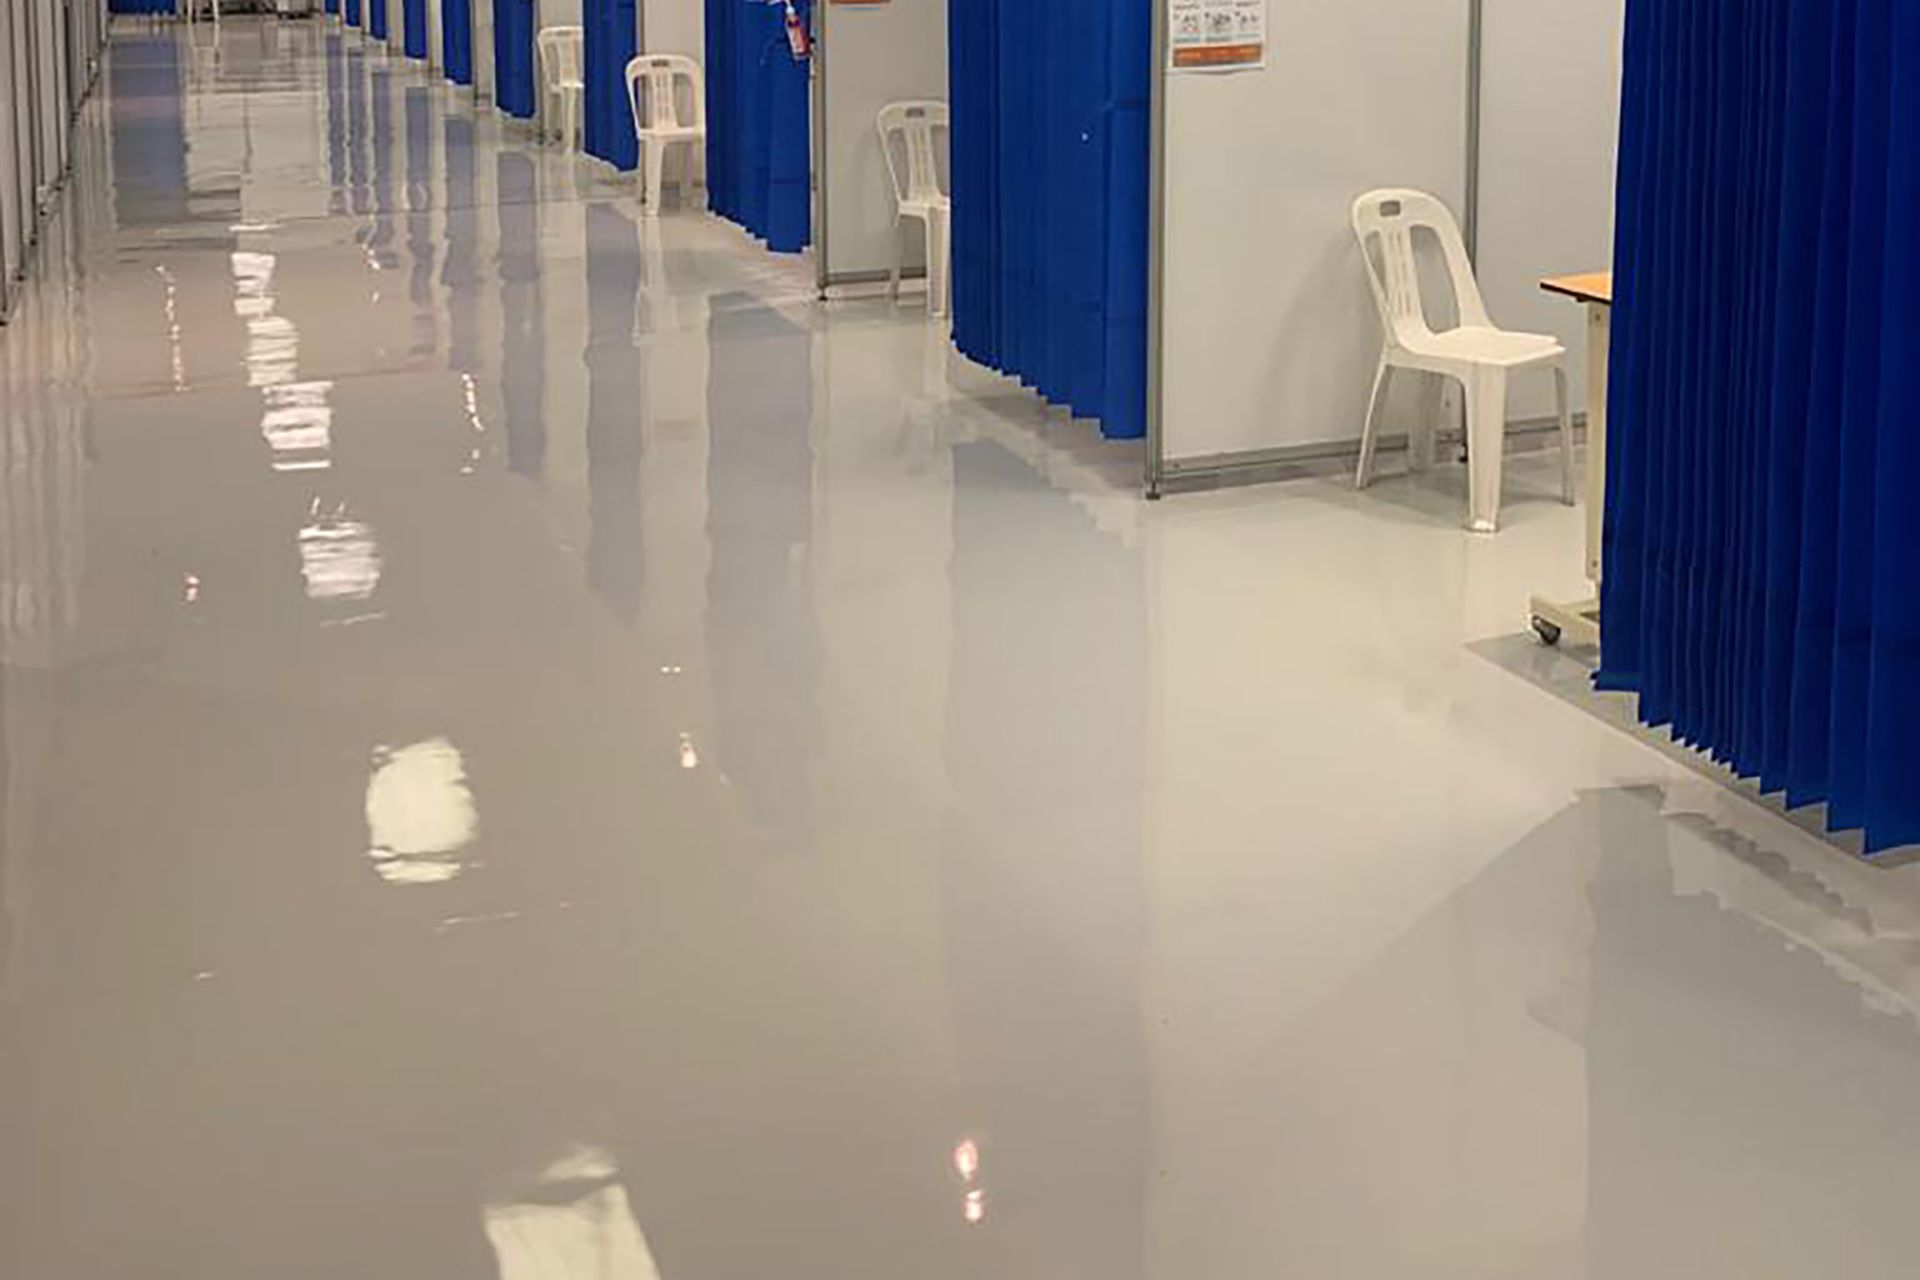 Sika's self-levelling epoxy floor coating were specified to assist the KZN Department of Health with flawlessly smooth floors for COVID health care facility.